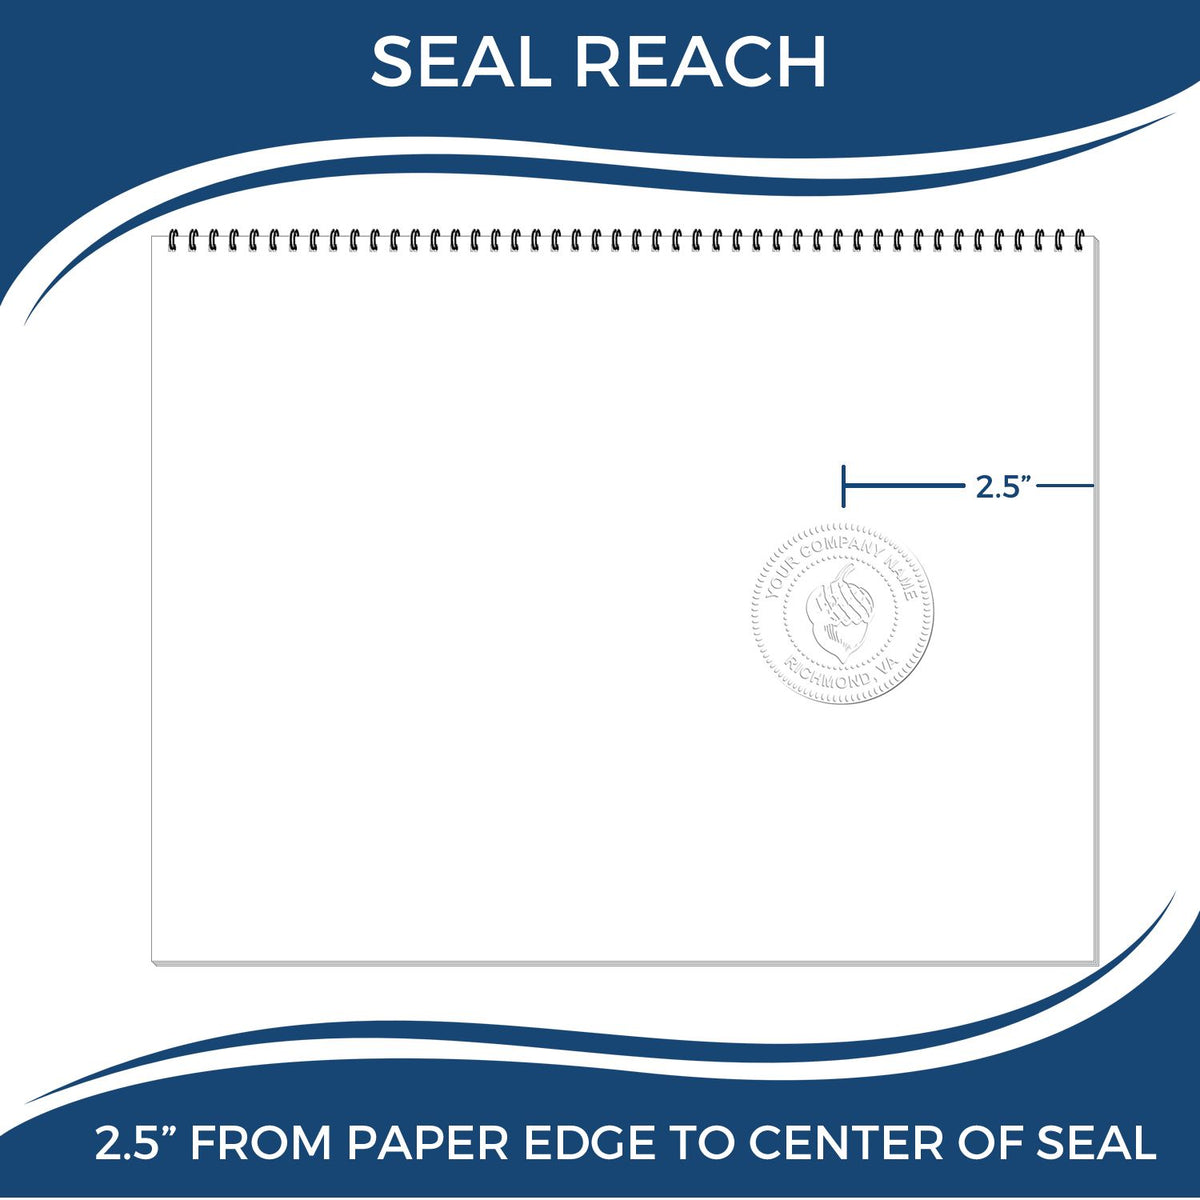 An infographic showing the seal reach which is represented by a ruler and a miniature seal image of the State of Michigan Long Reach Architectural Embossing Seal